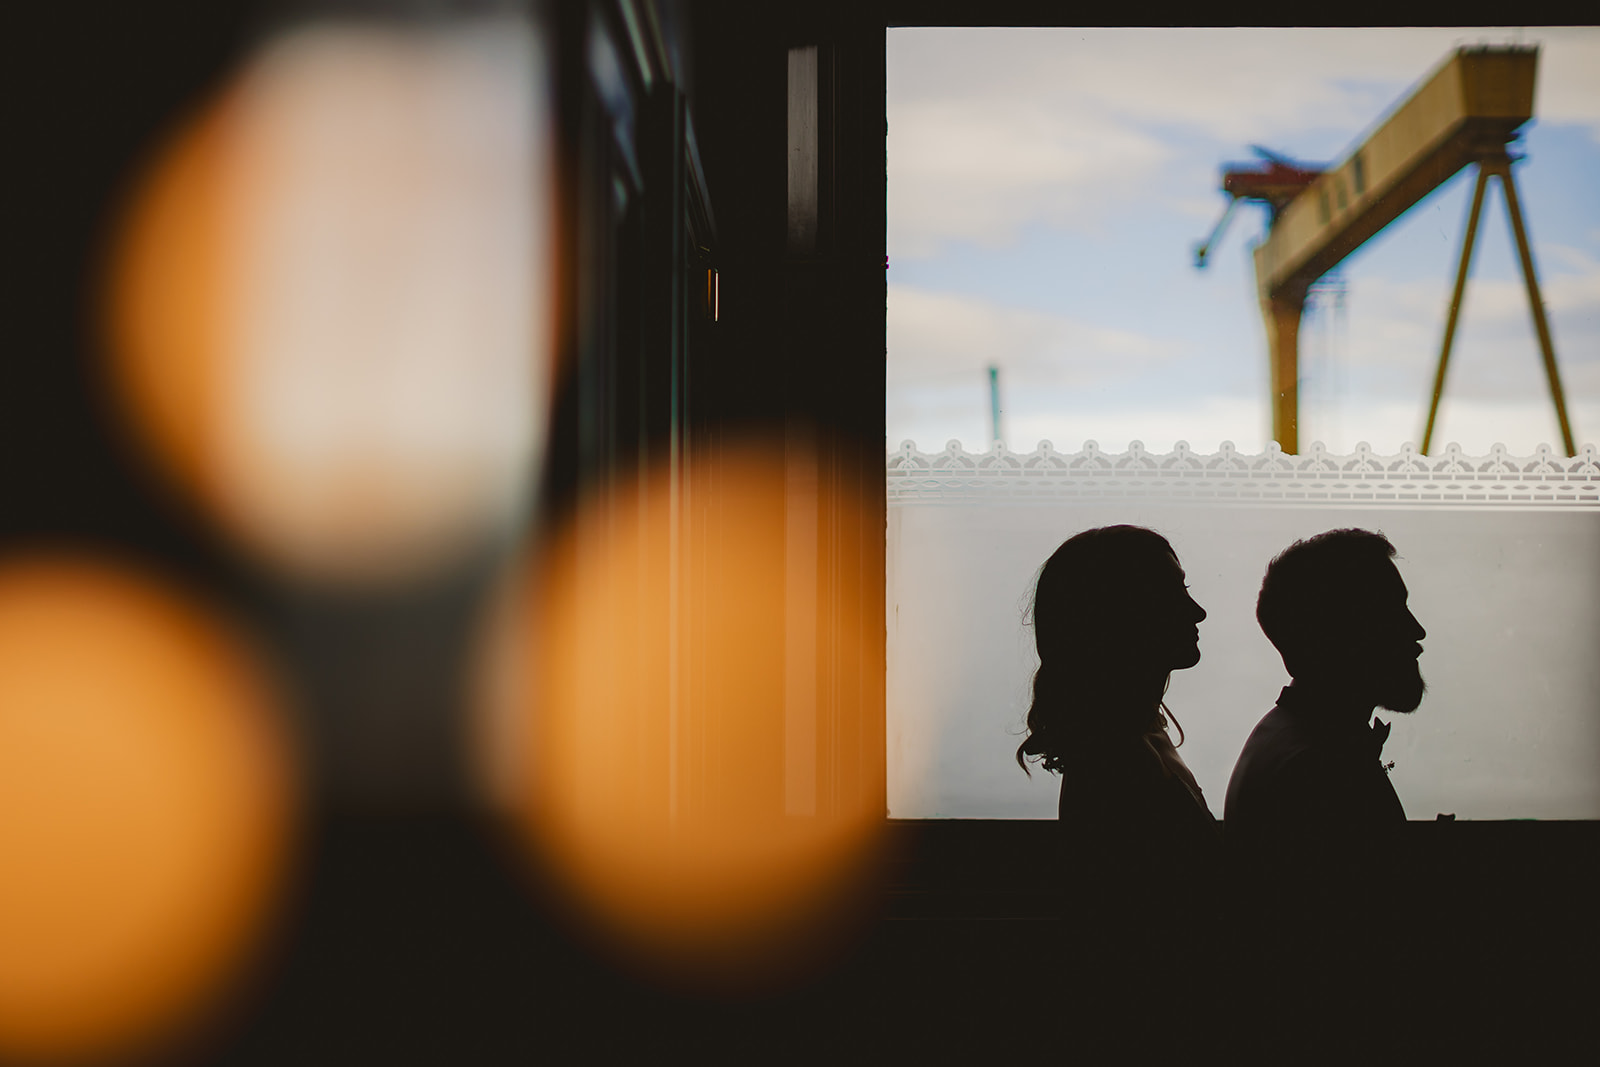 Silhouette shot of couple of their wedding day in front of Hardland and Wolff cranes Belfast City Centre